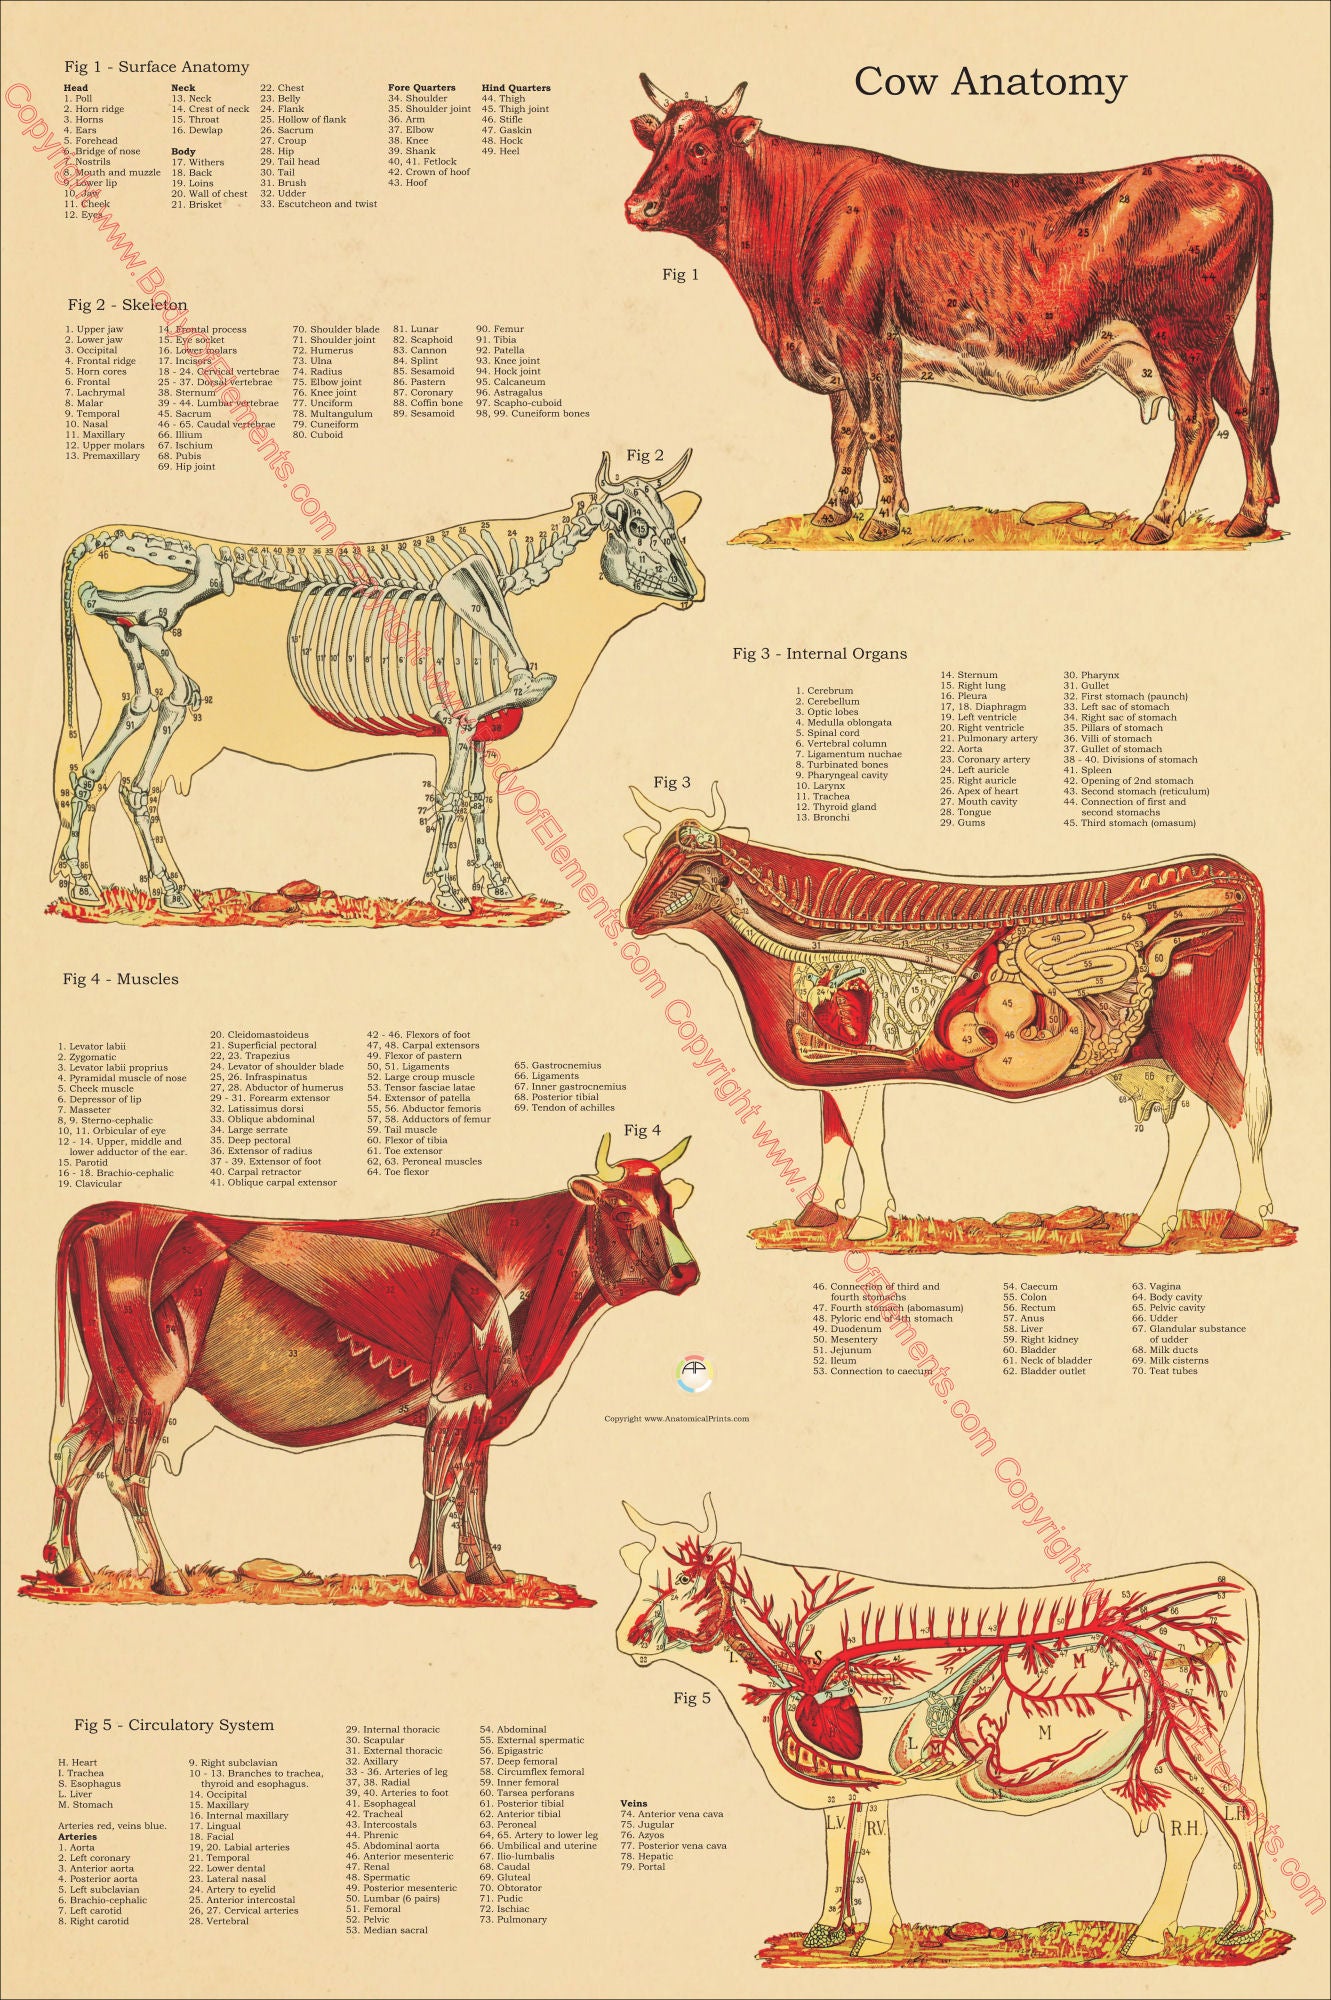 Cow anatomy poster